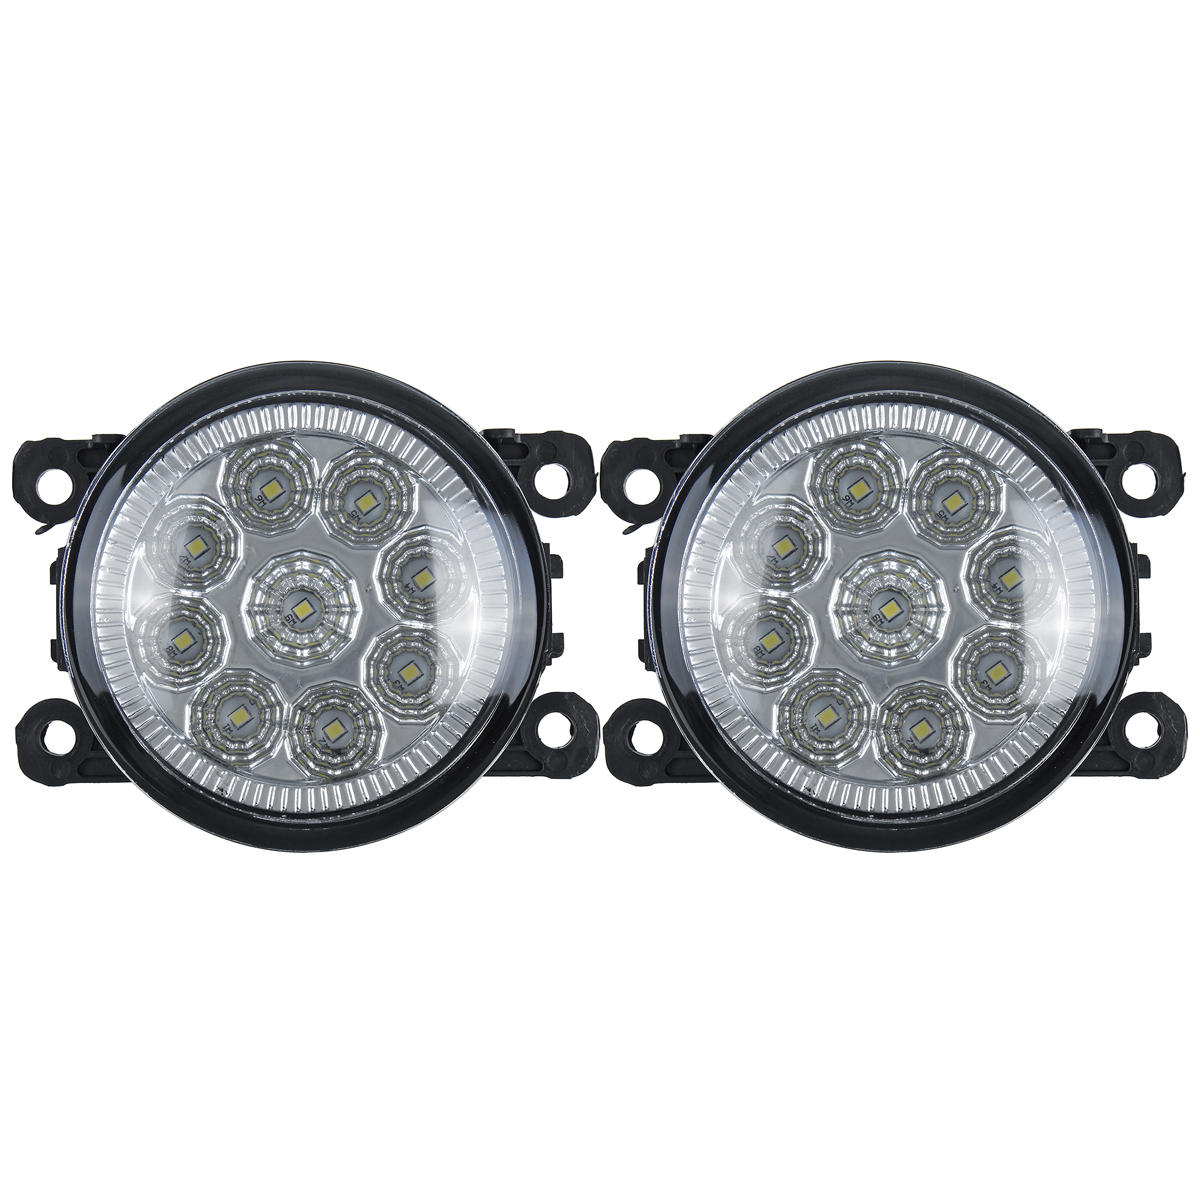 

Pair Car Front LED Fog Lights Lamps with H11 Bulbs White For Land Rover Discovery 4 Range Rover Sport L322